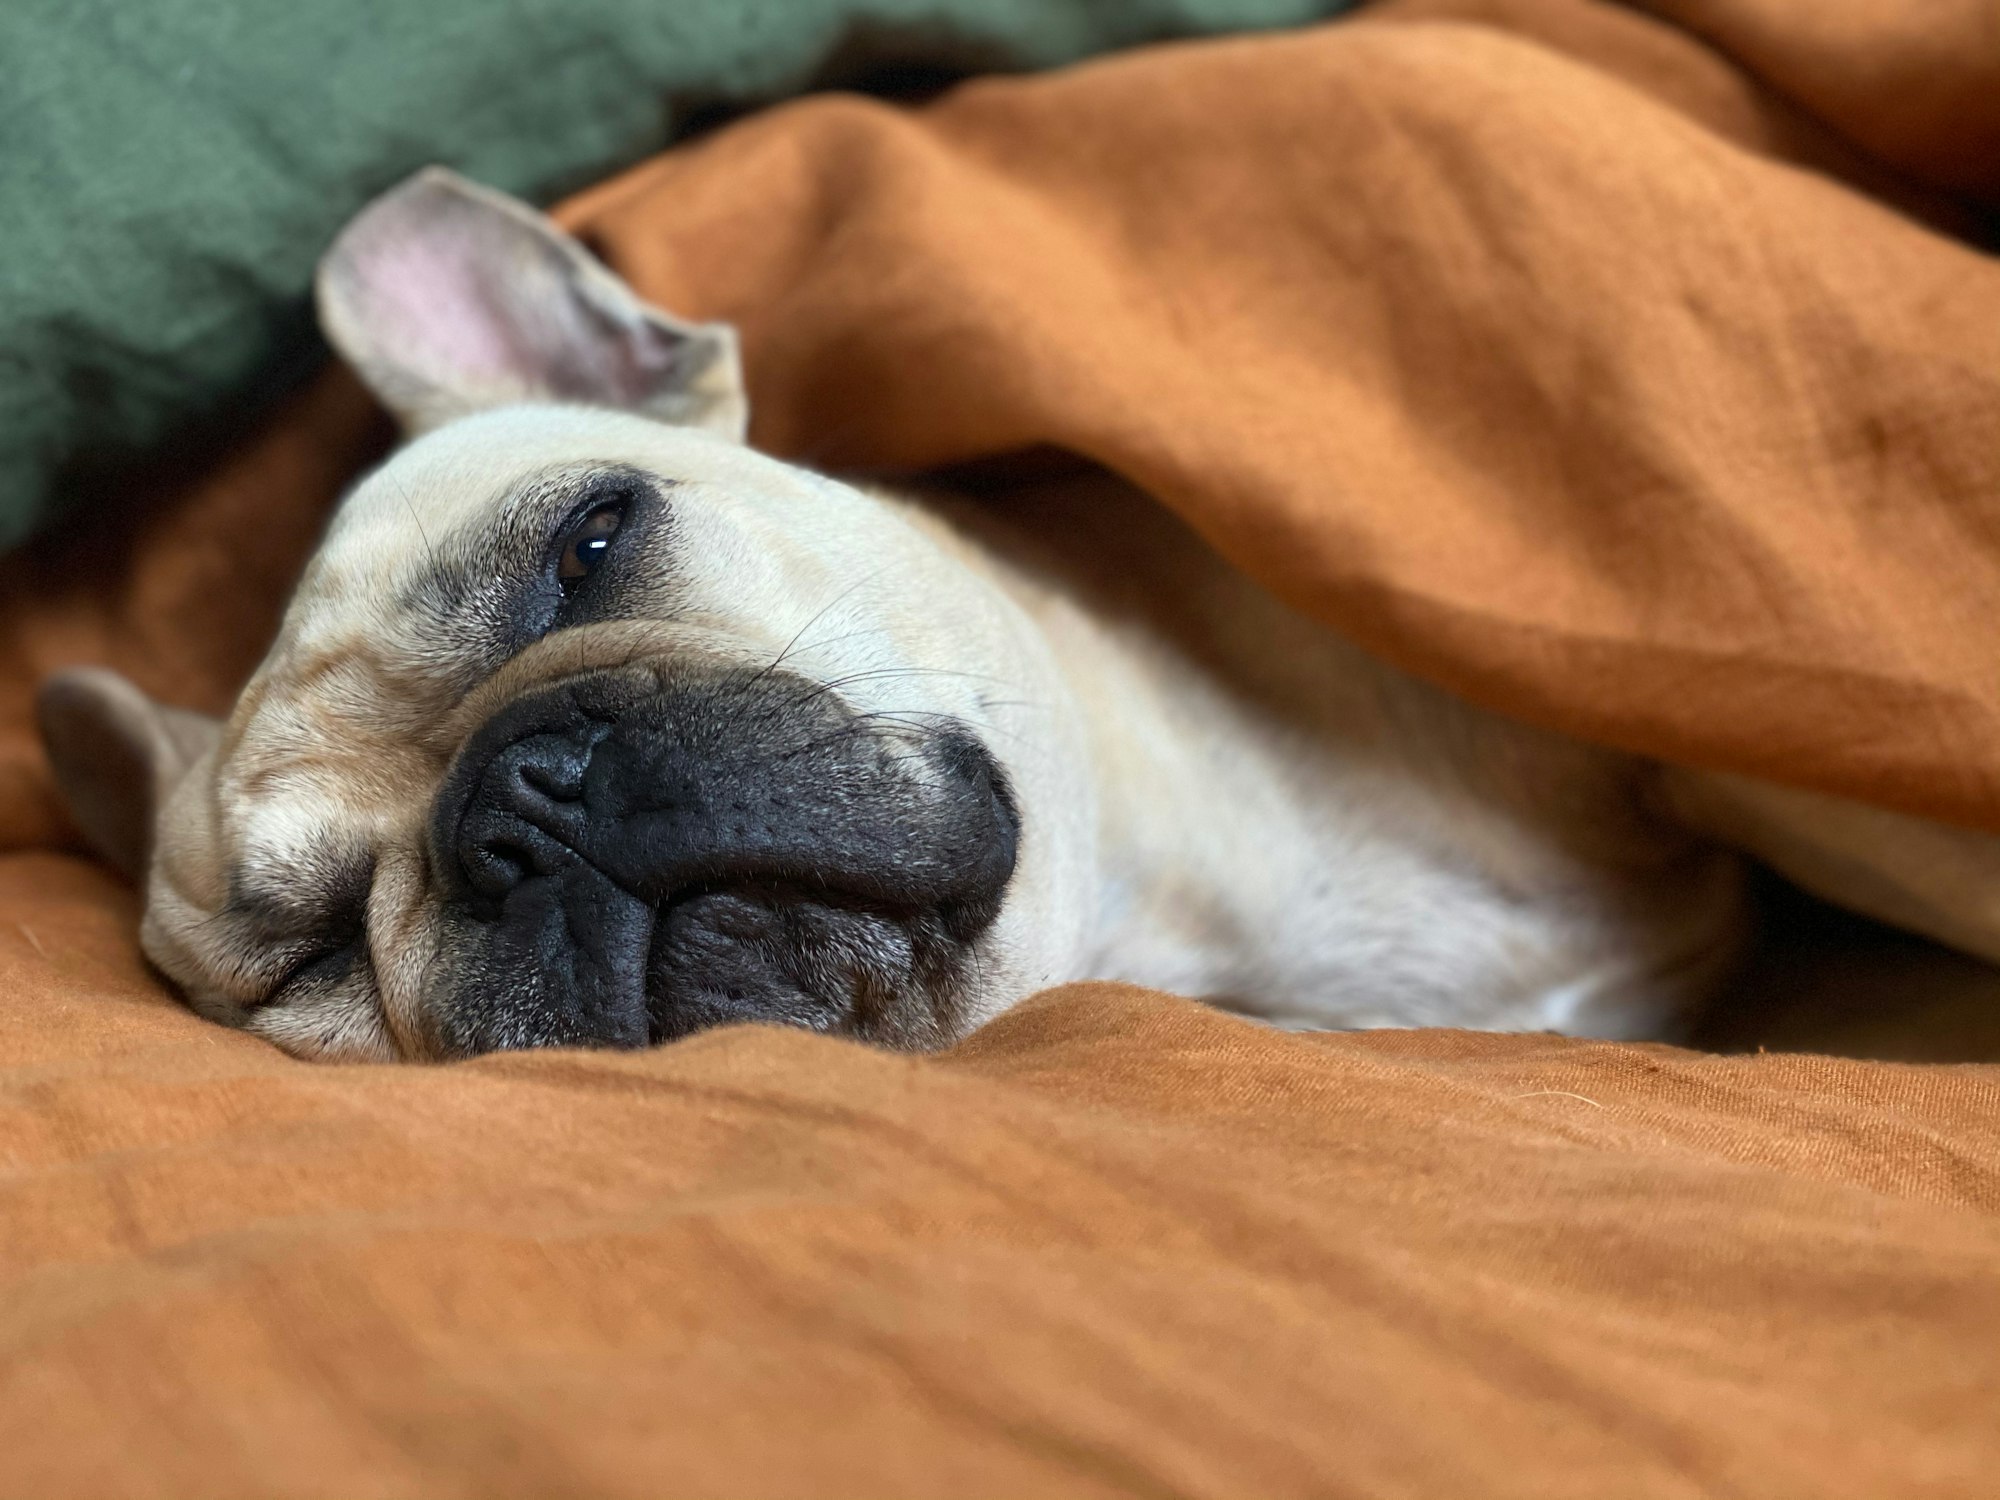 A lazy french bulldog wrapped in linen refusing to get out of bed... as frenchies tend to do.